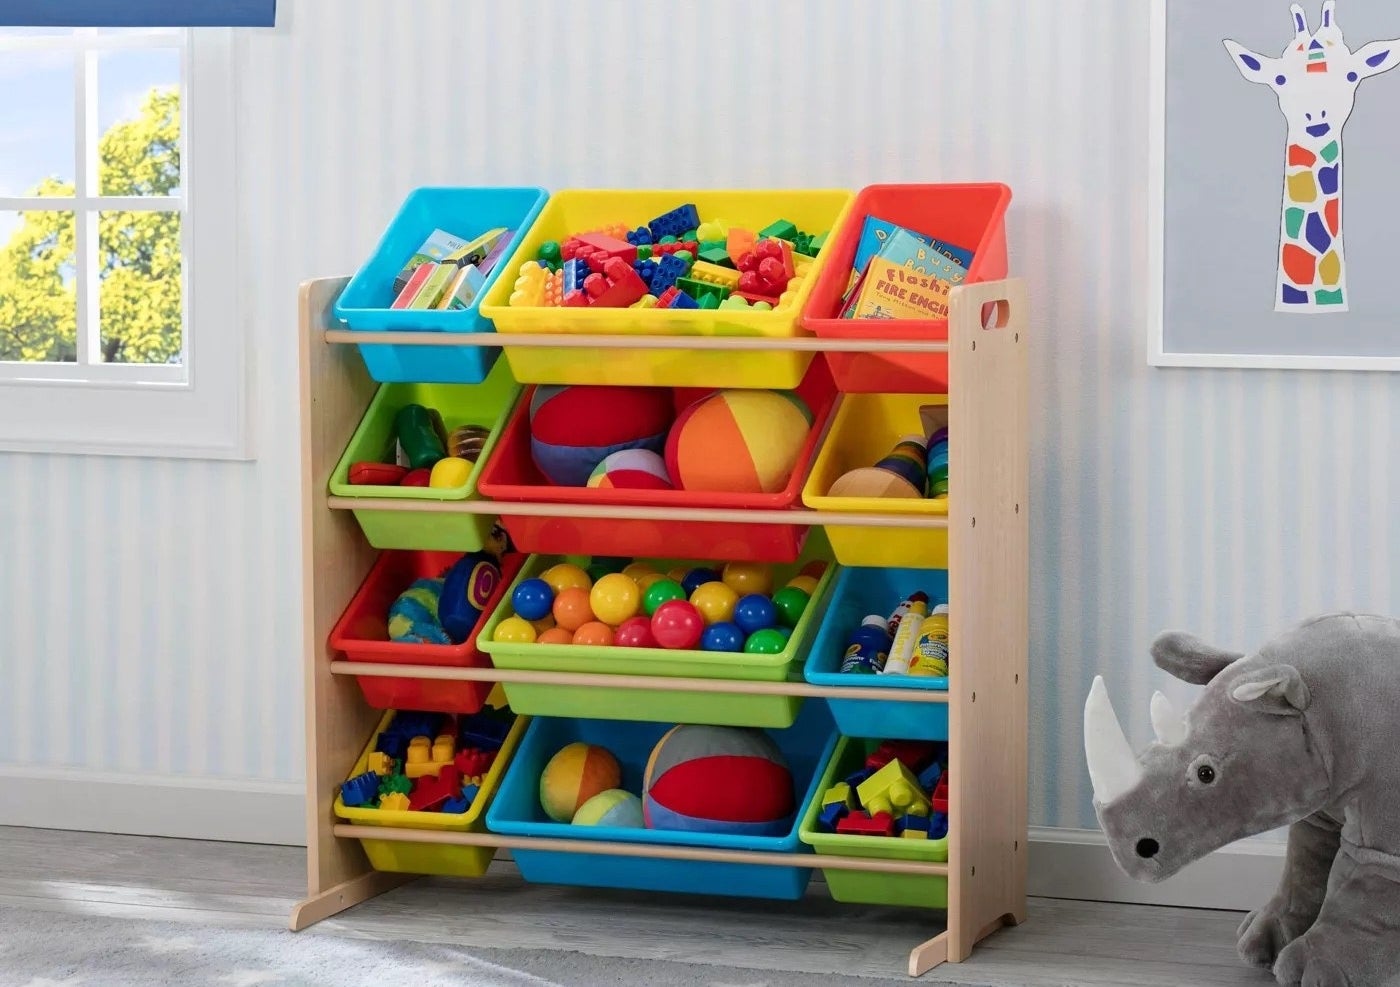 The toy storage organizer filled with assorted items